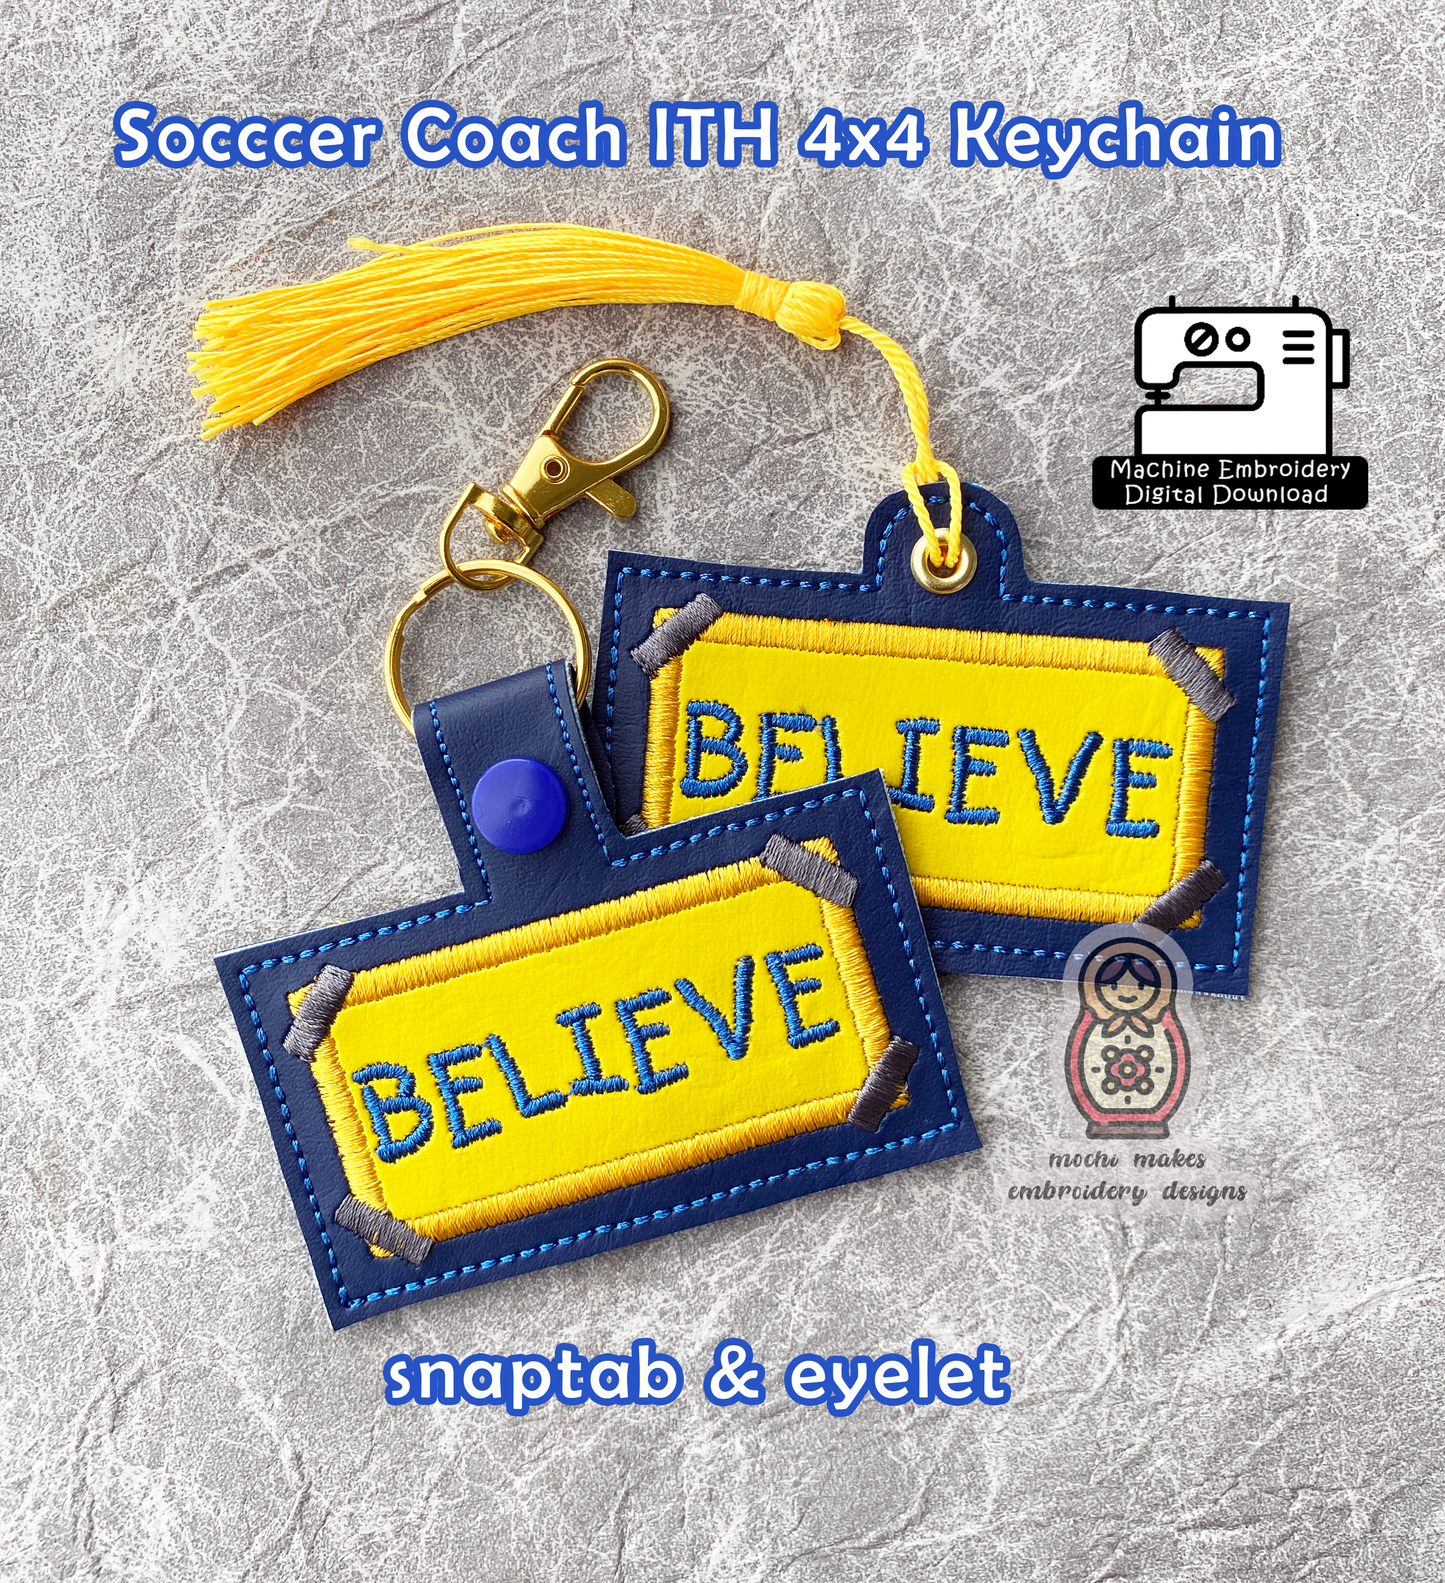 Football "Believe" Poster Soccer Coach Keychain ITH 4x4 Digital Embroidery Design Download DIY Inspirational In the Hoop FC Pattern Richmond